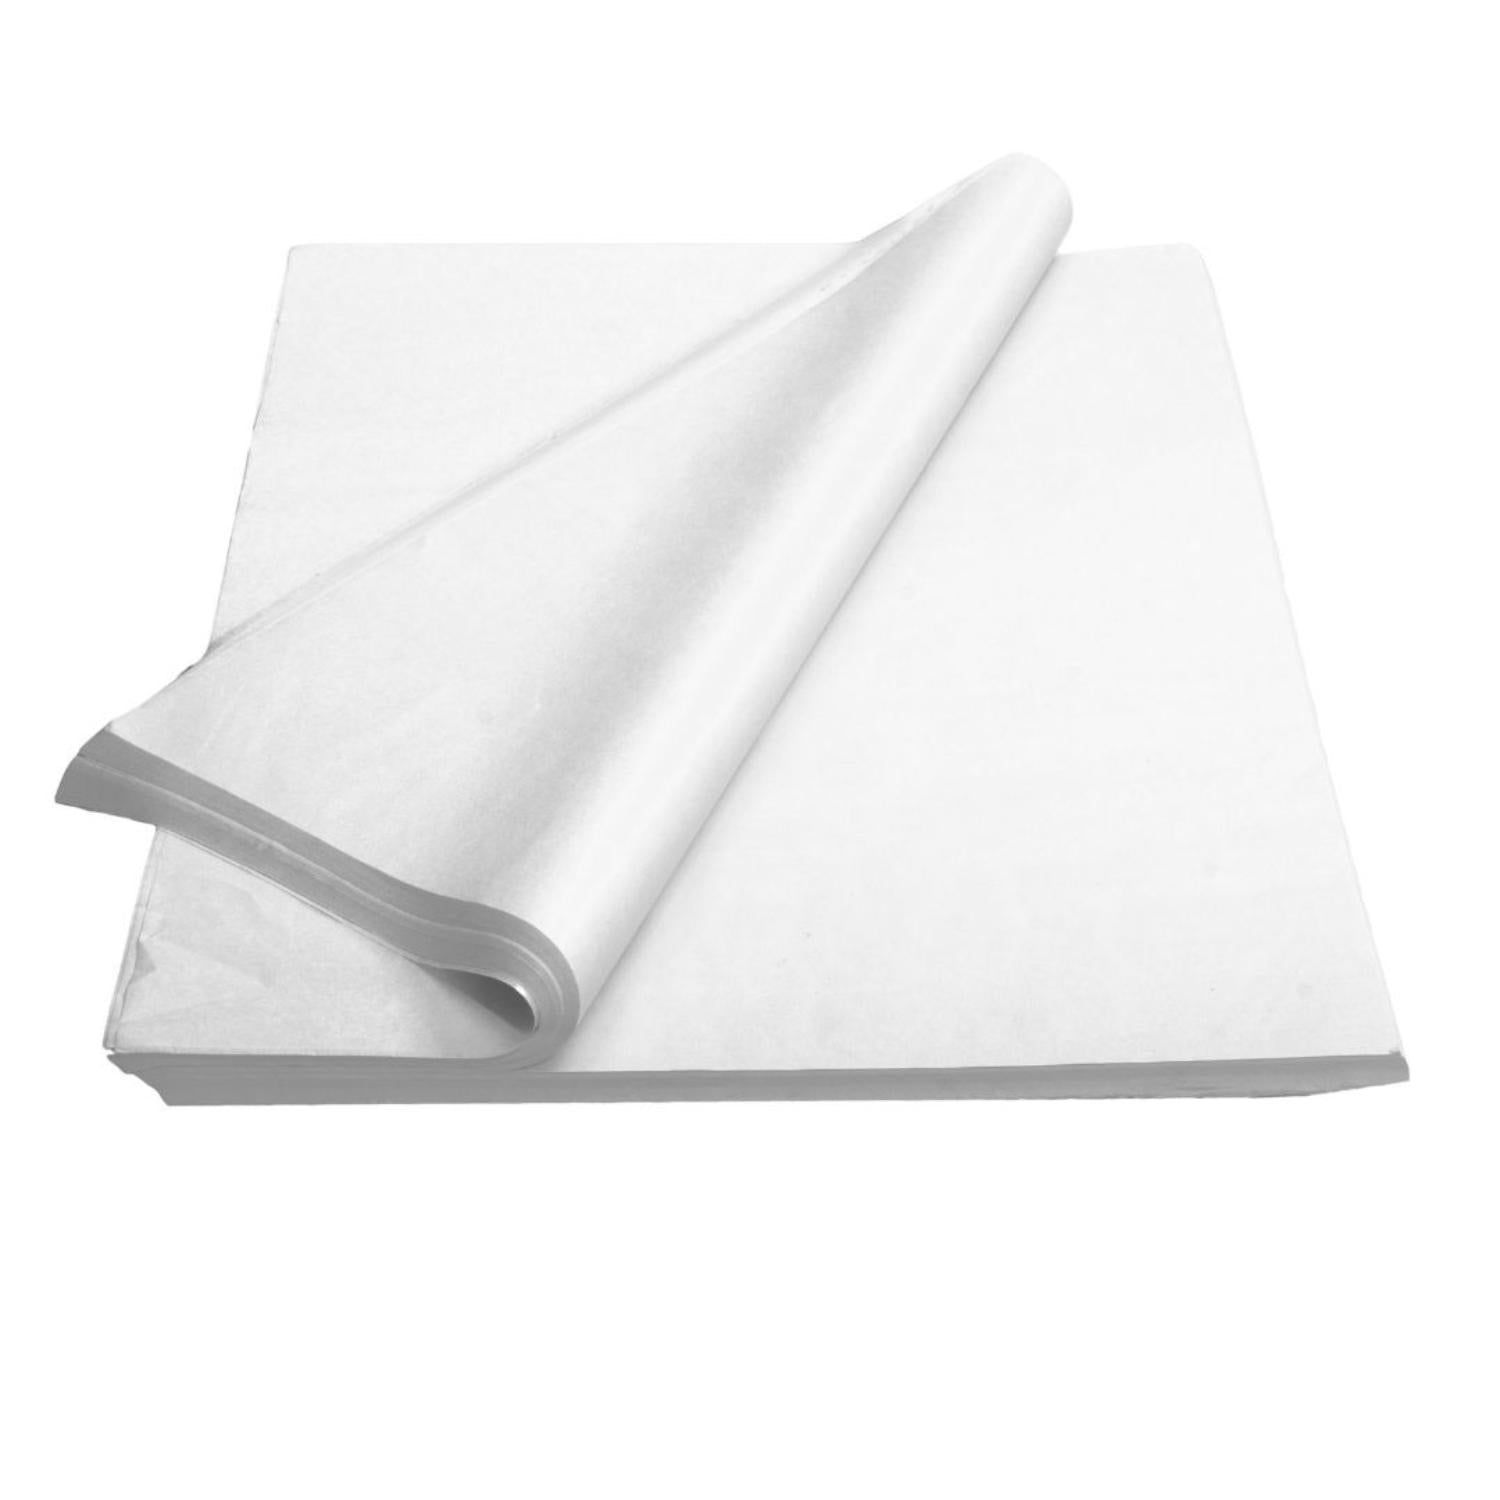 Cerise Tissue Paper Sheets, 20 X 30 for $59.64 Online